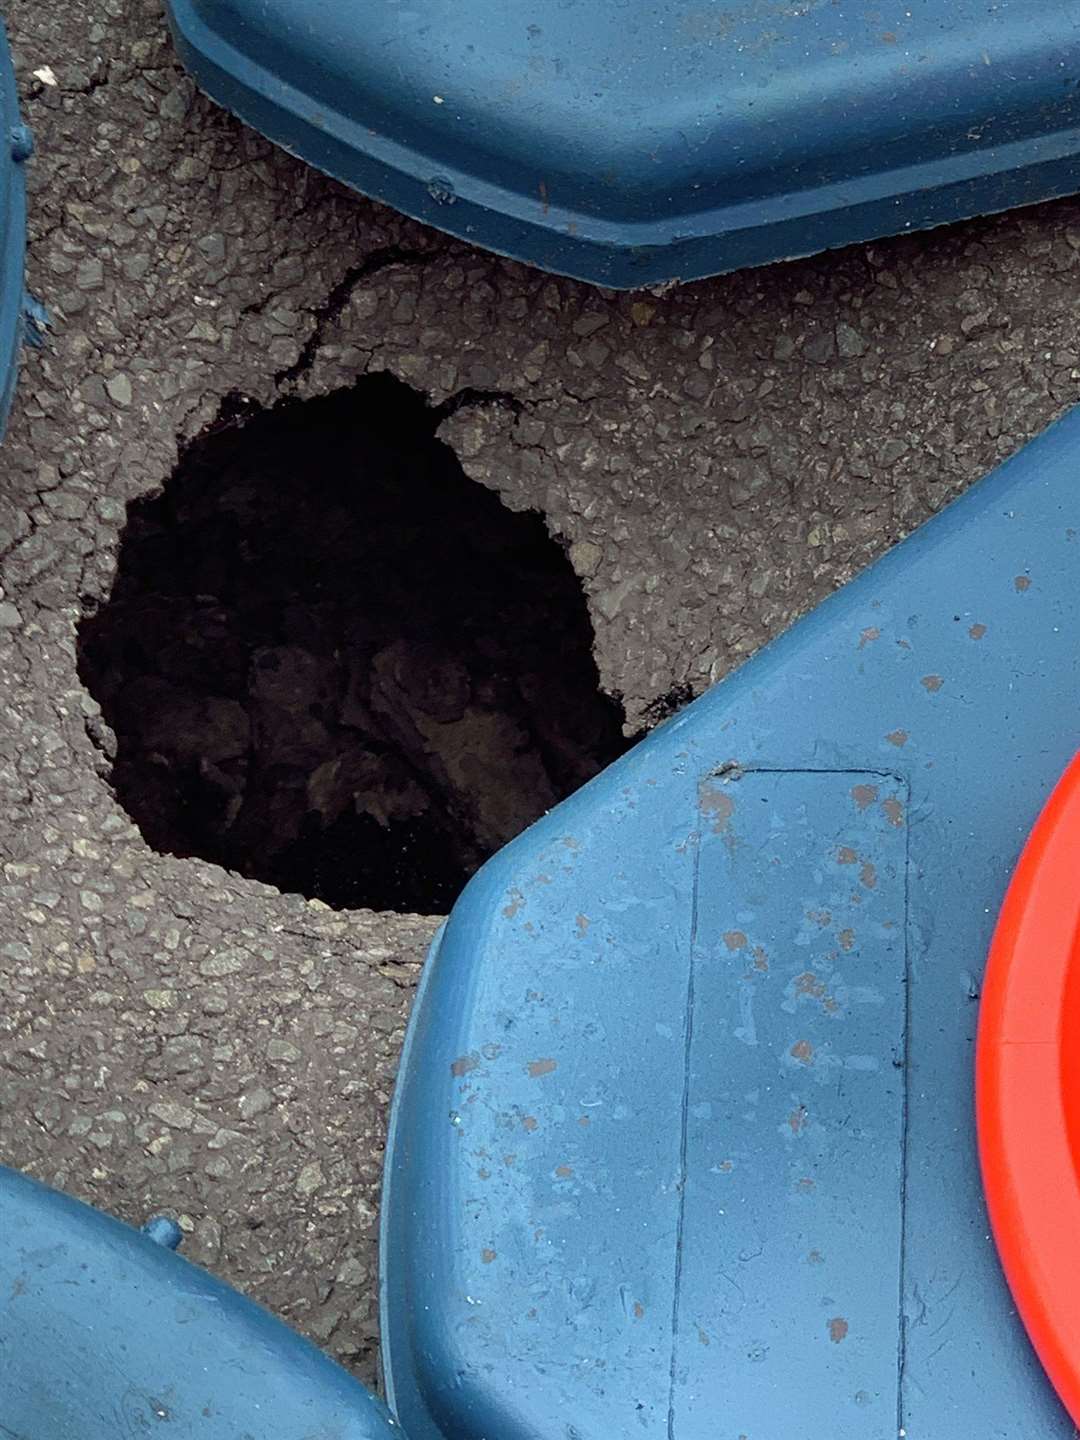 This sinkhole is said to be far larger under the surface. Picture: Claire Jones